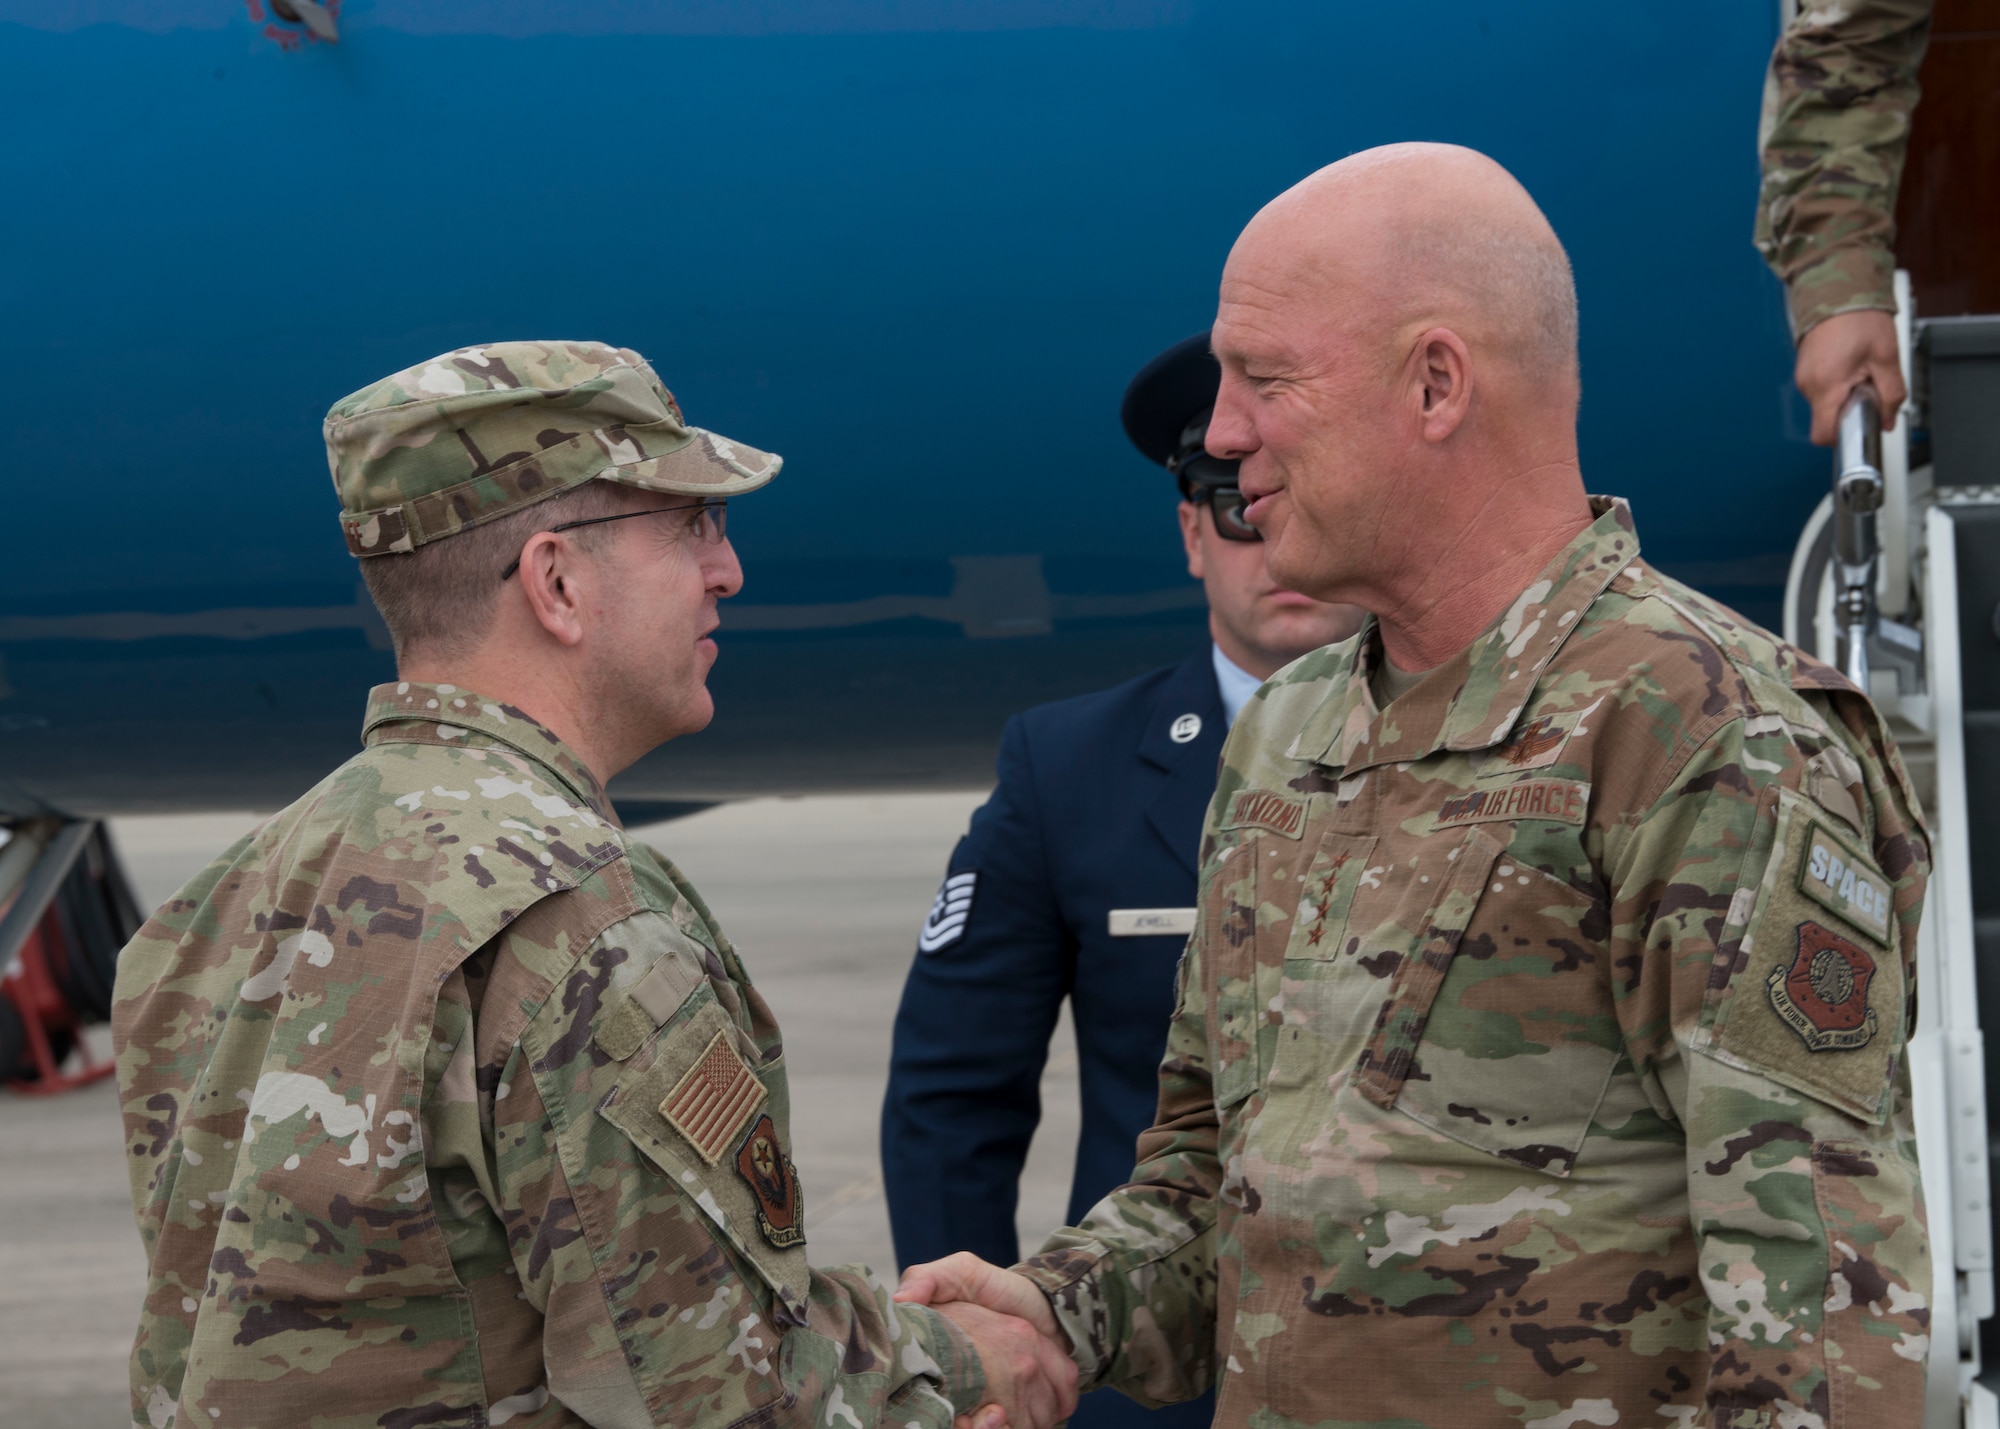 Two people greeting one another on a flightline.